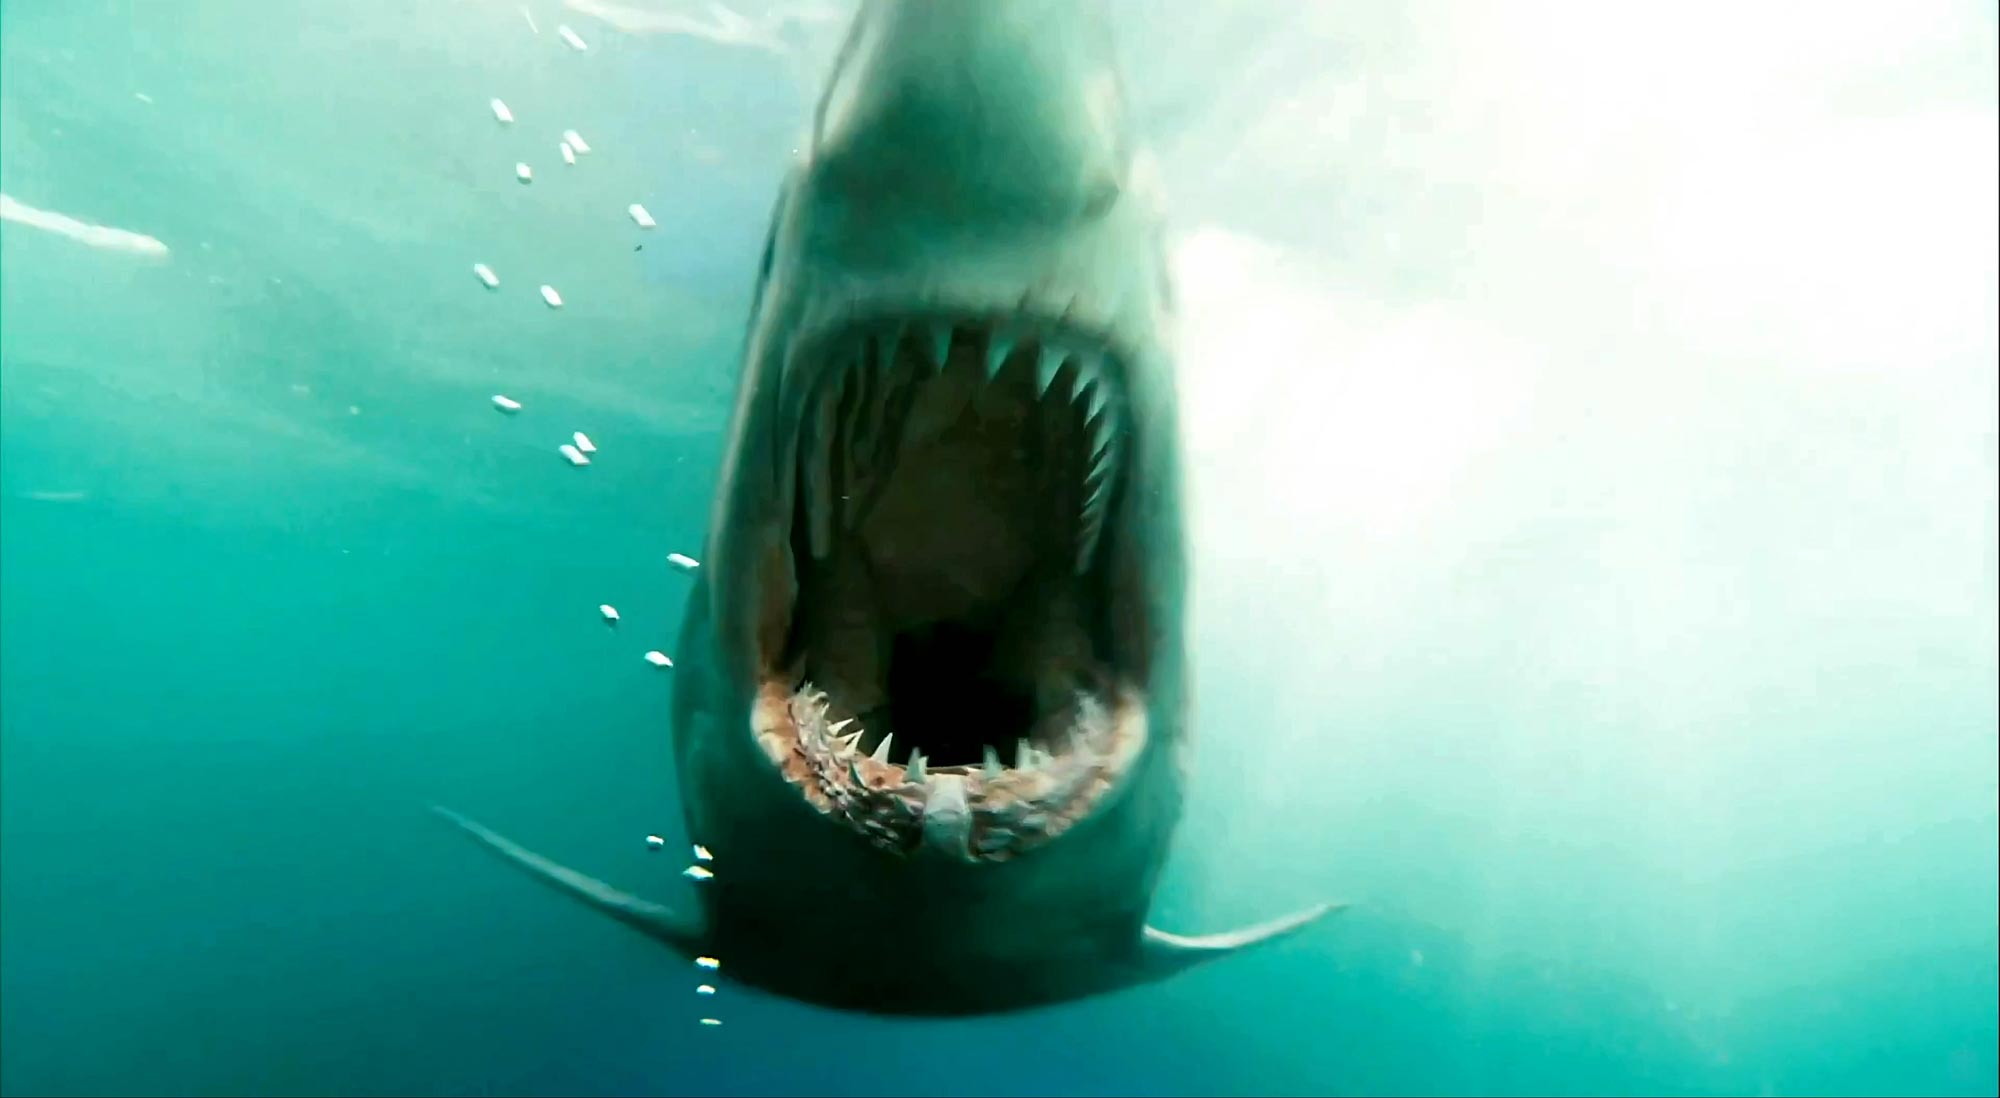 Shark Night Available Now on Blu-ray/DVD